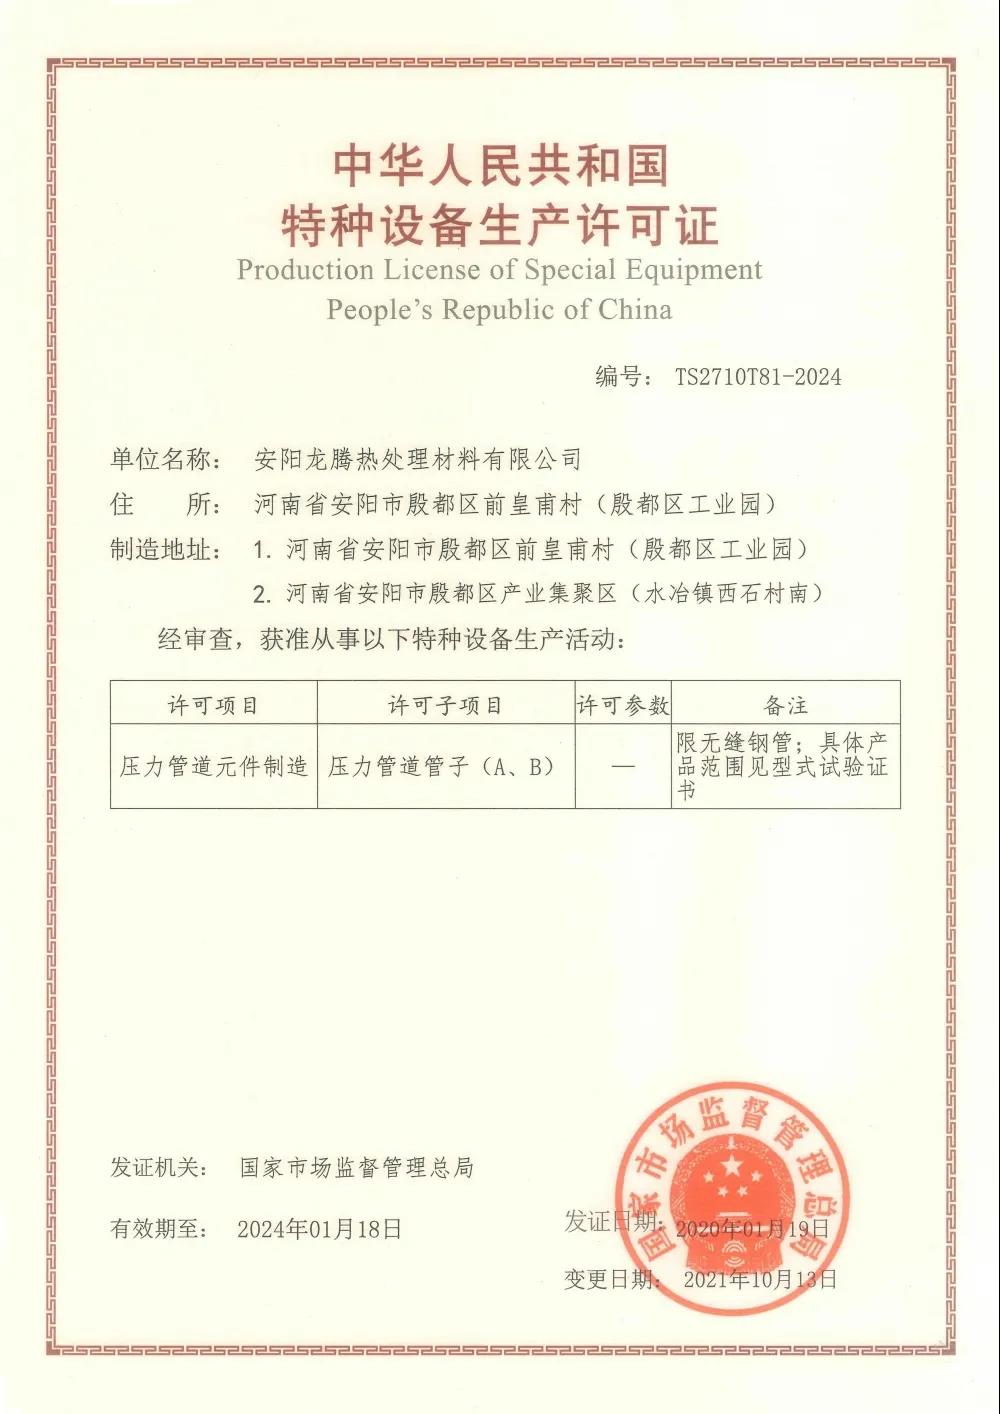 Production License of Special Equipment People’s republic of China